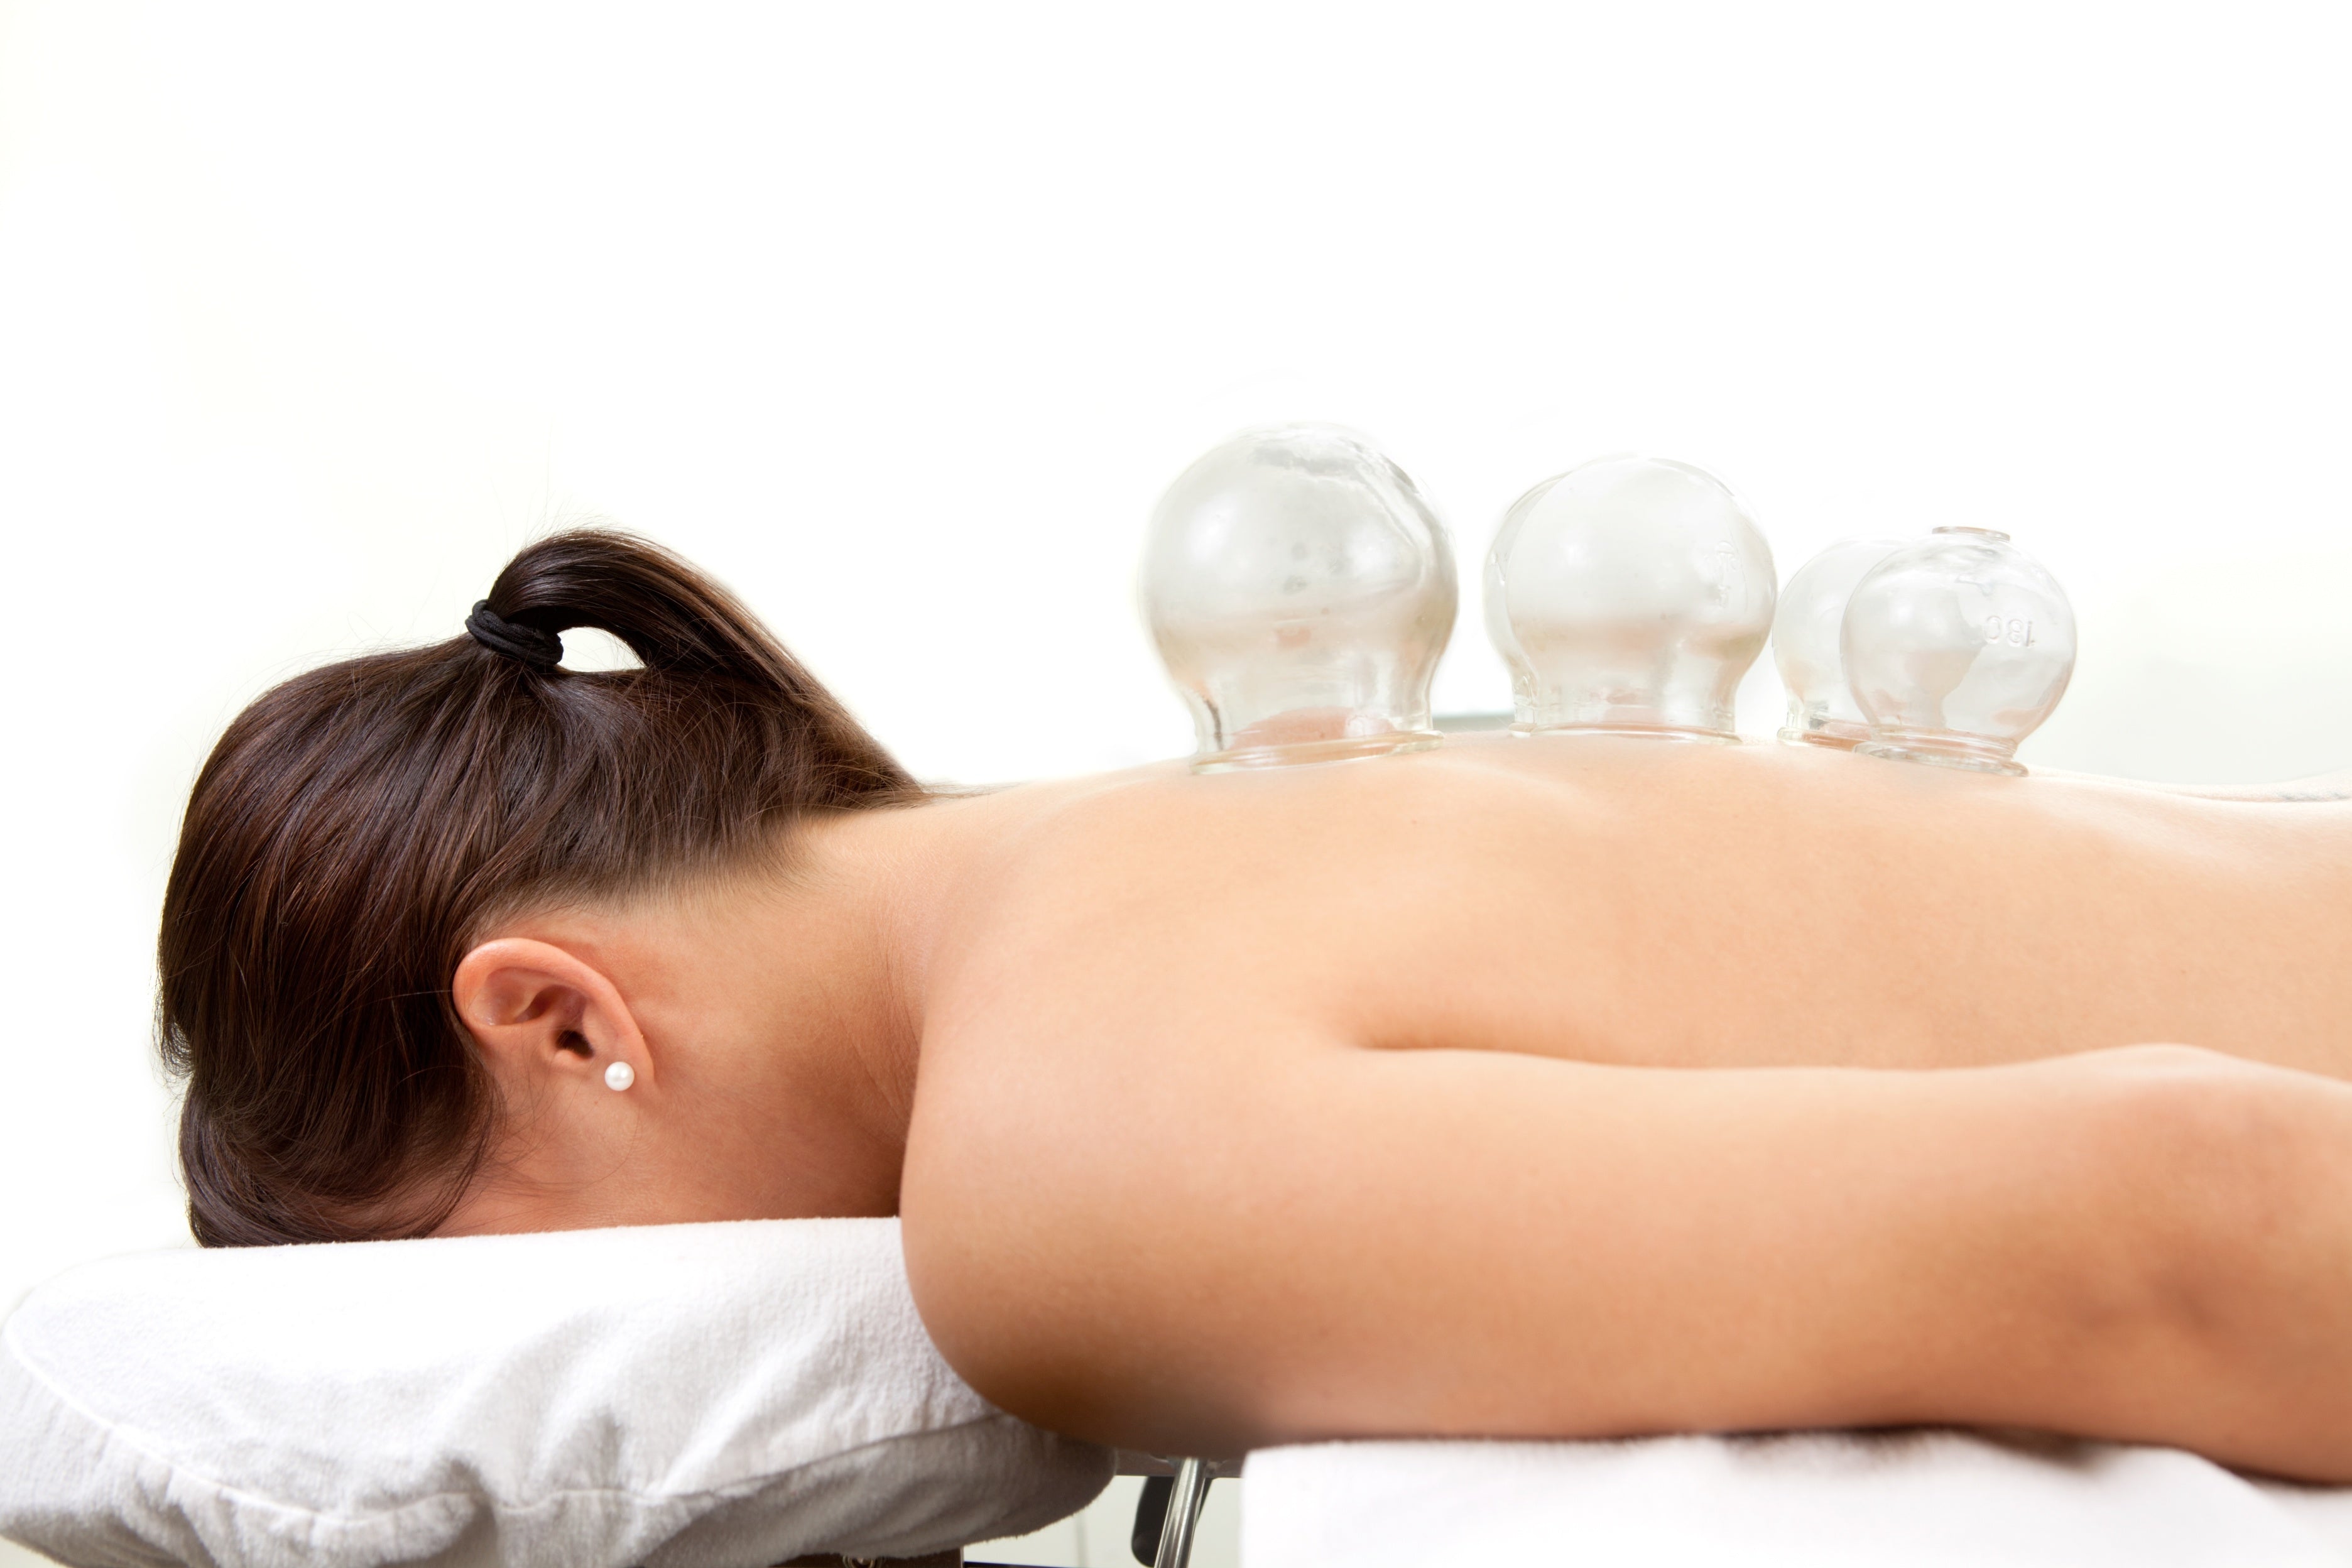 The Anatomy of Cupping Therapy – Uses, Benefits, and more